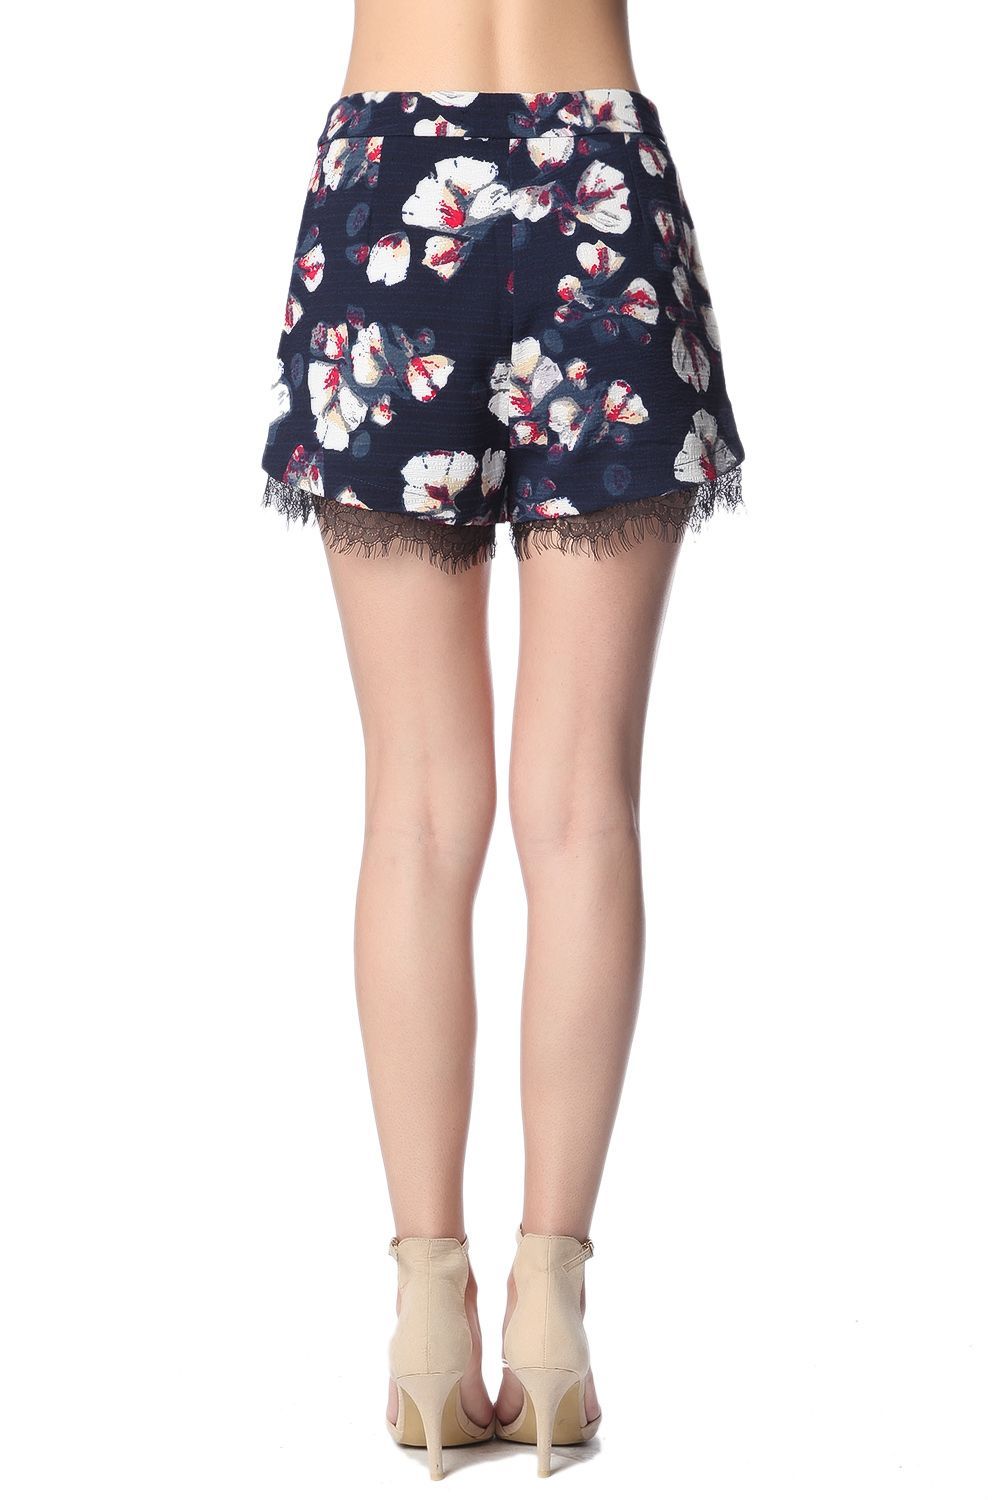 Navy Blue Shorts in Floral Print With Lace Detail